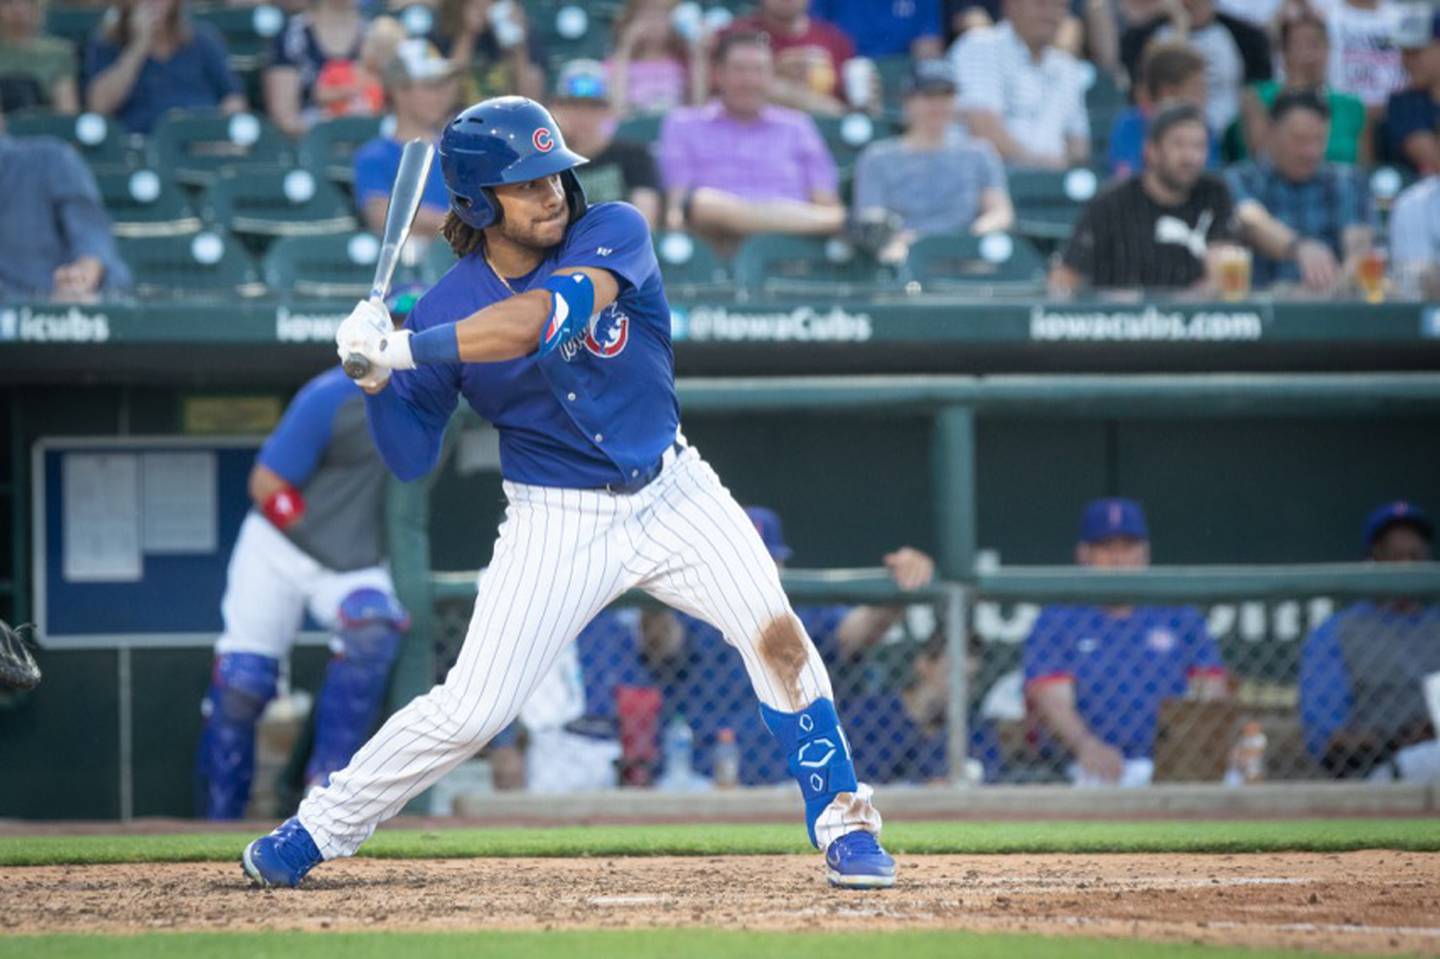 Michael Hermosillo of the Iowa Cubs bats against the Columbus Clippers during a Minor League Baseball Triple-A East game at Principal Park on Tuesday, June 8, 2021 in Des Moines, Iowa. Photo courtesy of the Iowa Cubs